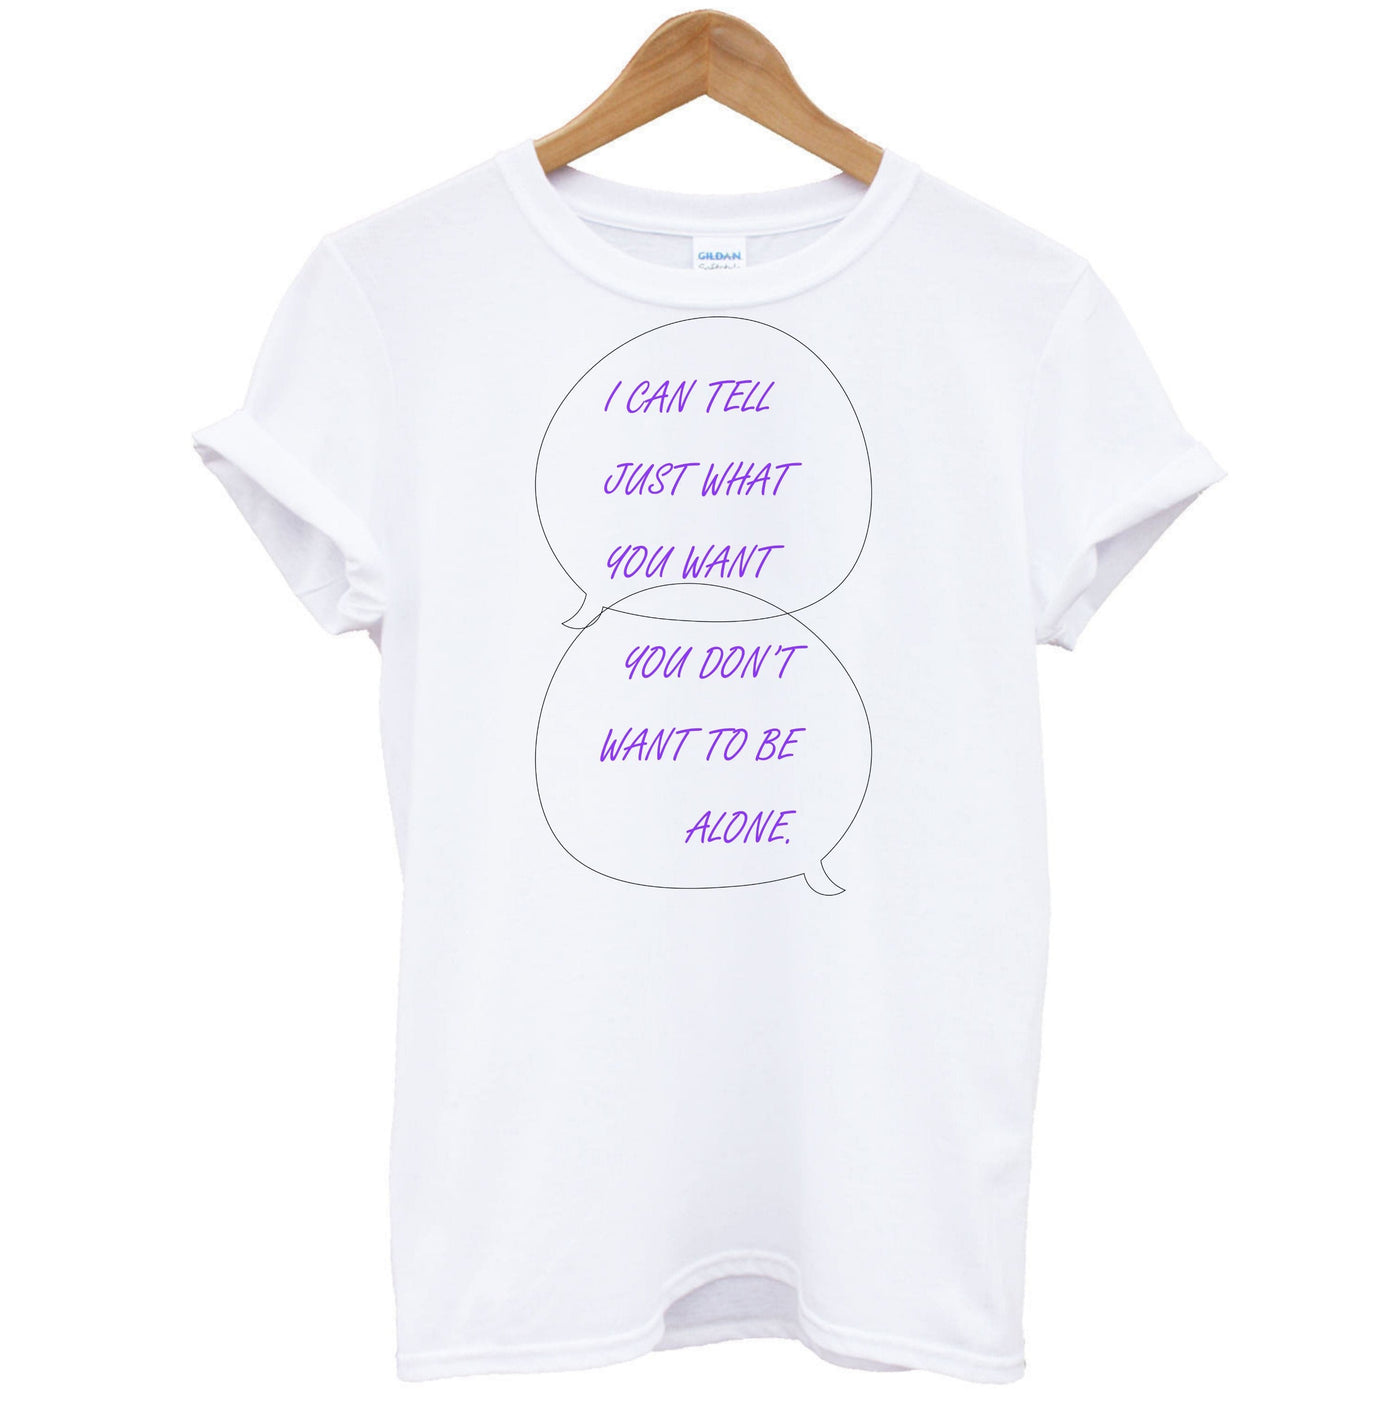 You Don't Want To Be Alone - Festival T-Shirt